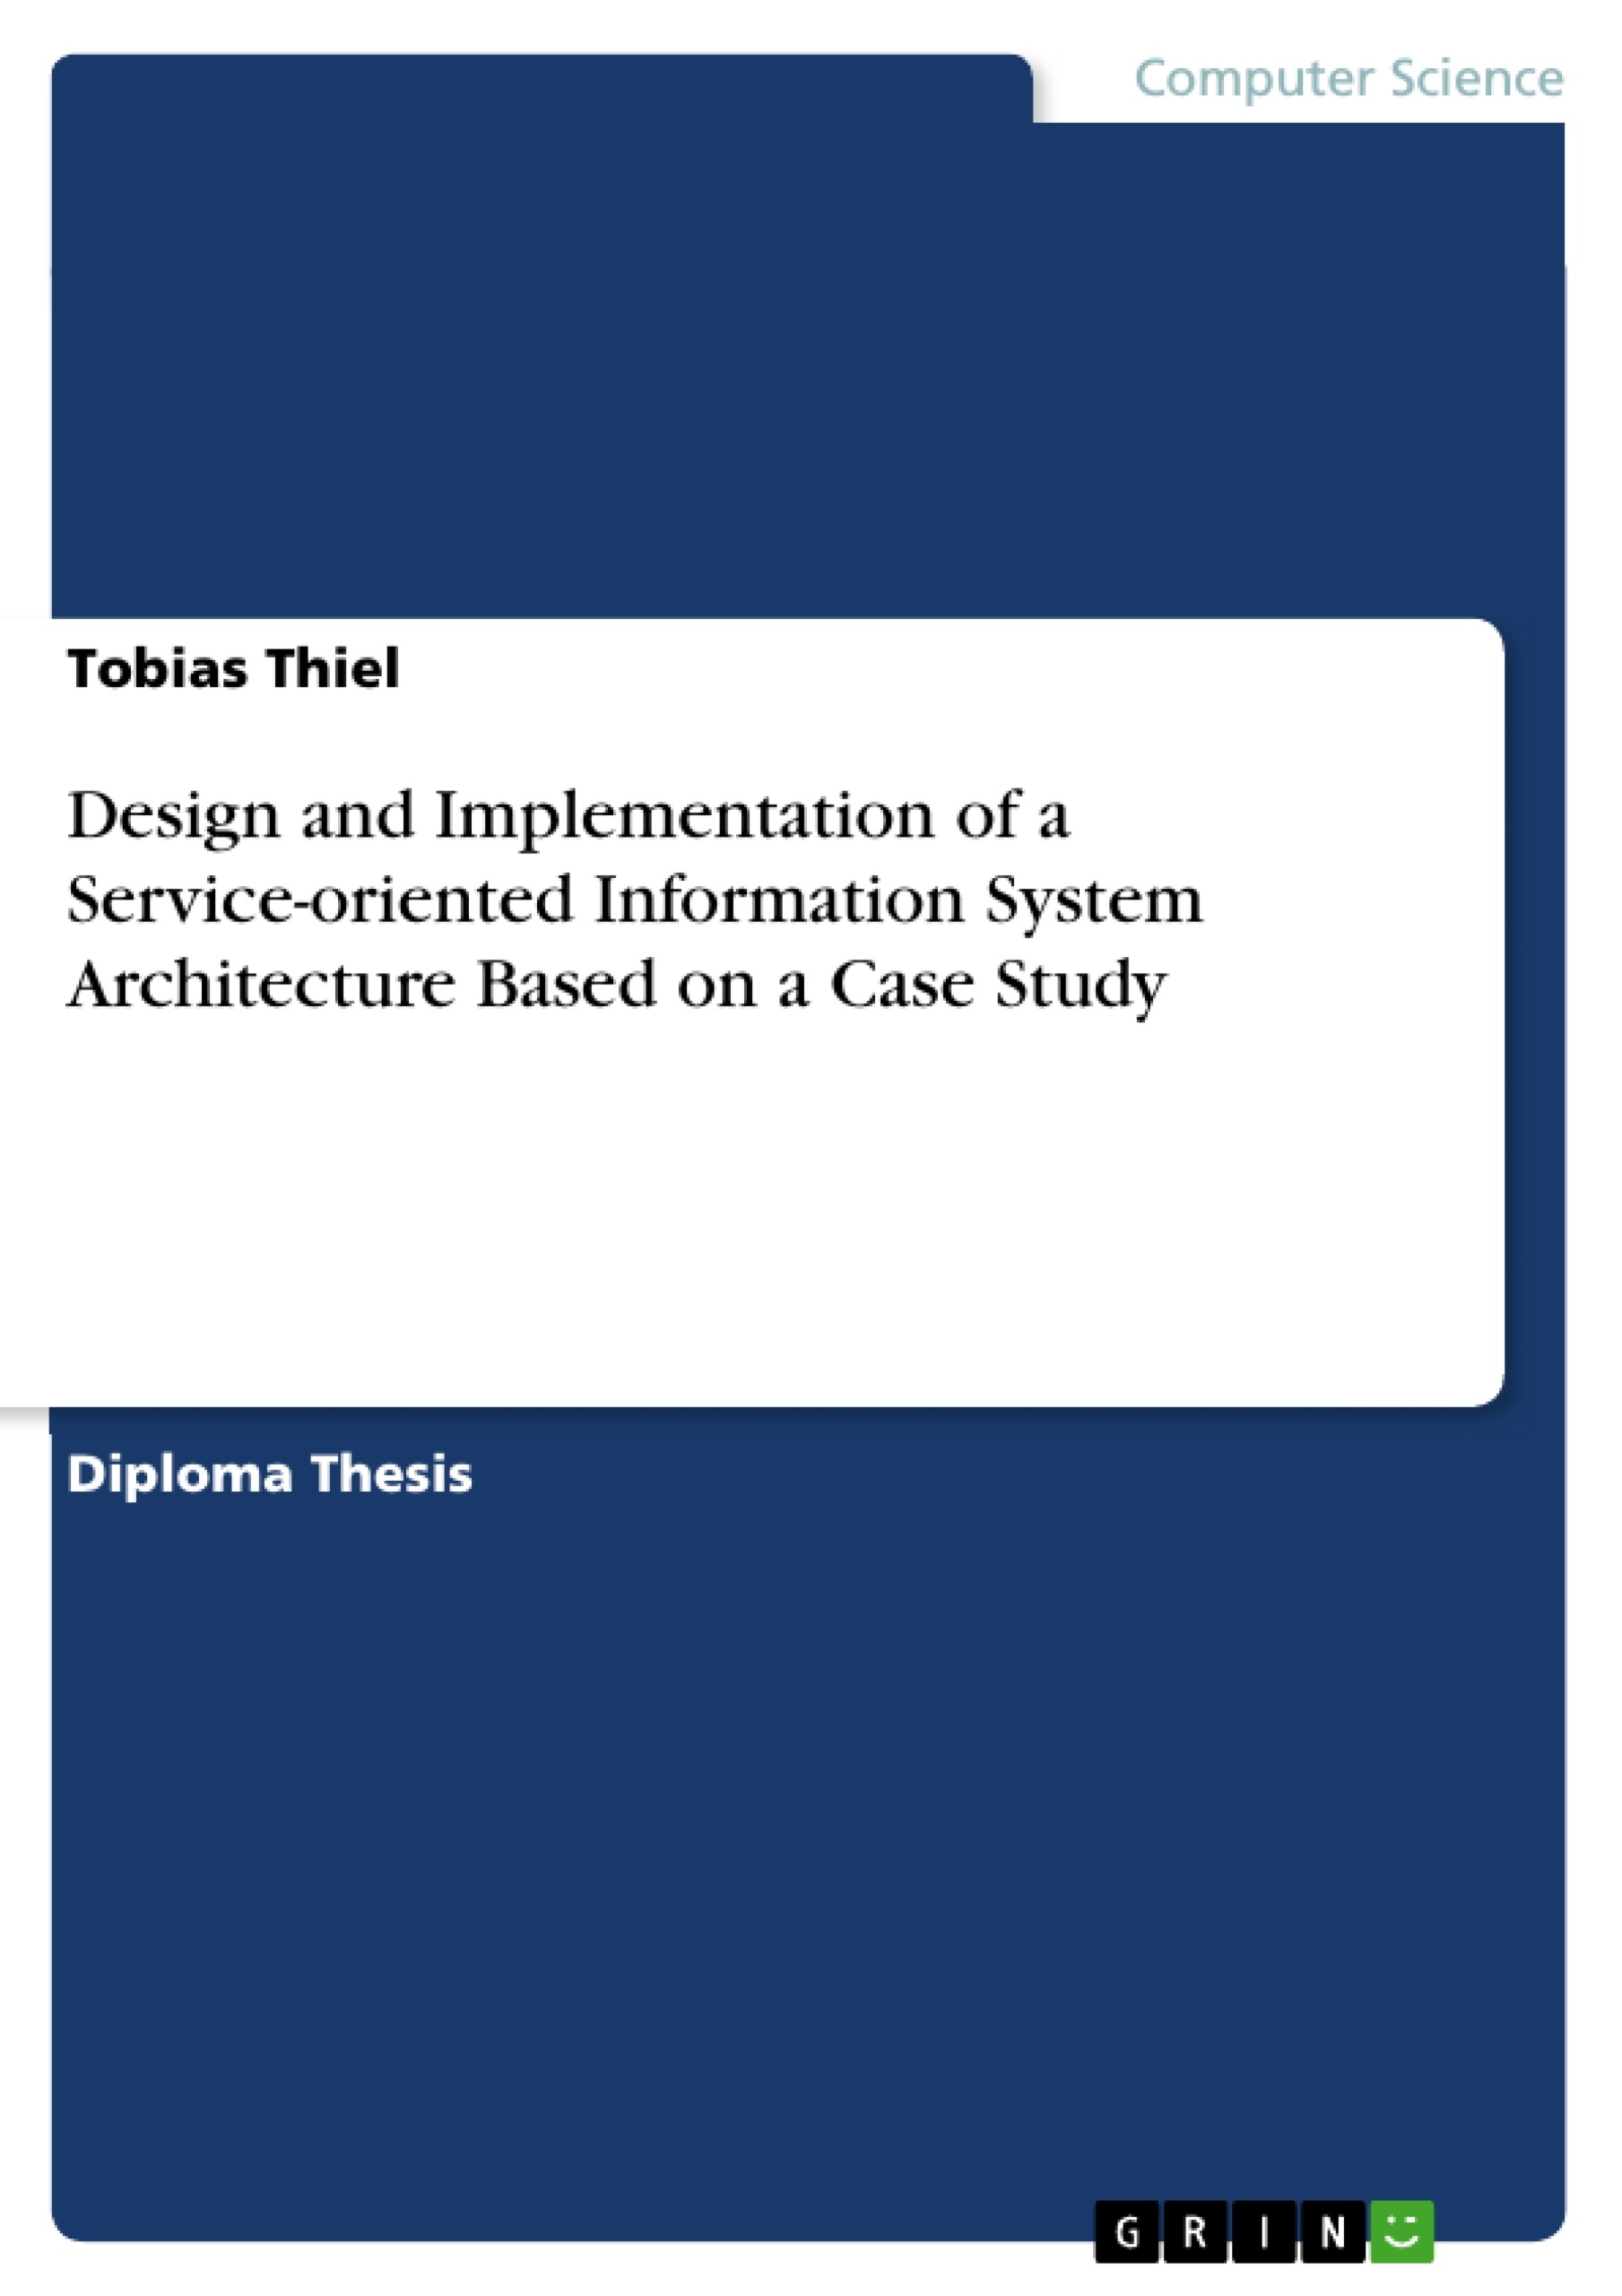 Title: Design and Implementation of a Service-oriented Information System Architecture Based on a Case Study